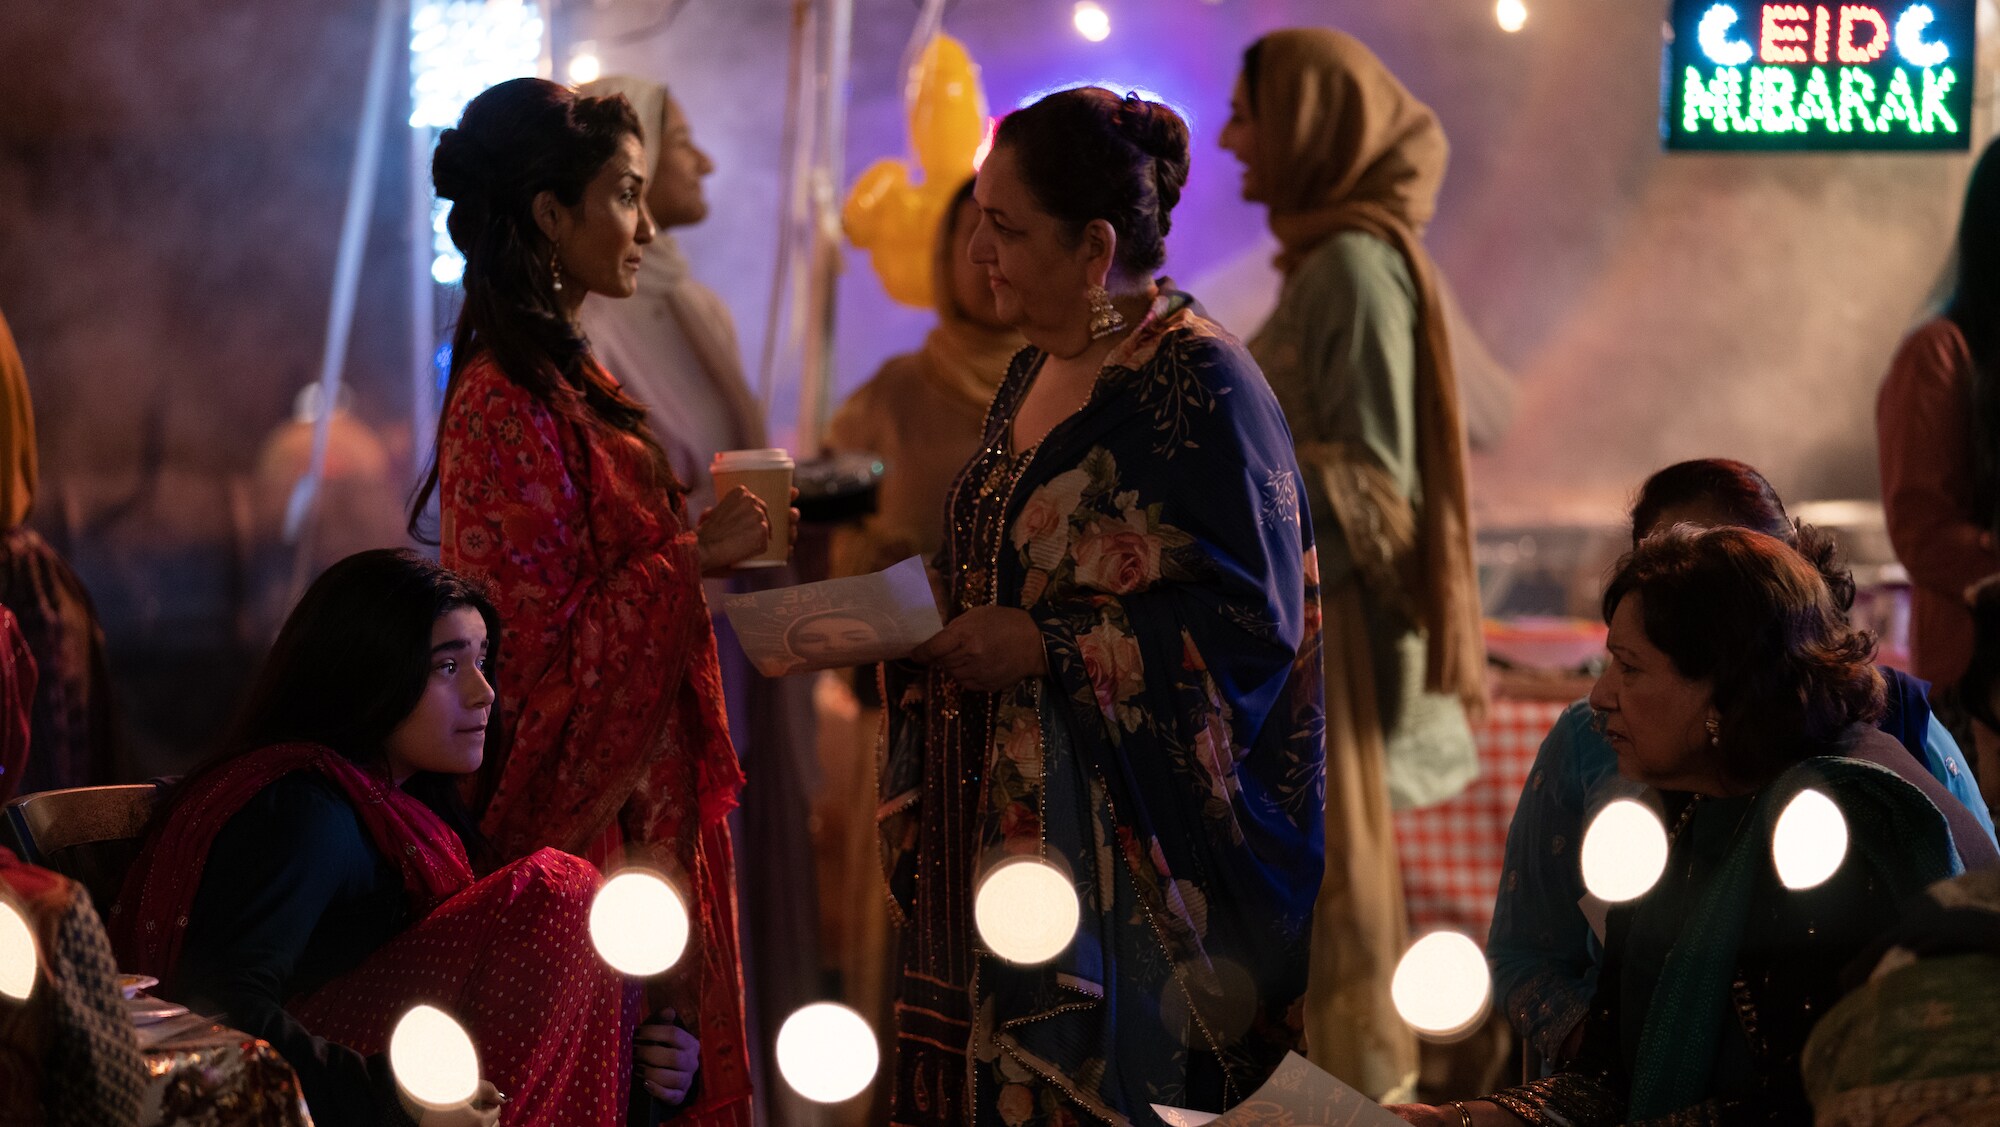 (L-R): Iman Vellani as Ms. Marvel/Kamala Khan, Anjali Bhimani as Auntie Ruby, and Sophia Mahmud as Auntie Zara in Marvel Studios' MS. MARVEL, exclusively on Disney+. Photo by Daniel McFadden. ©Marvel Studios 2022. All Rights Reserved.